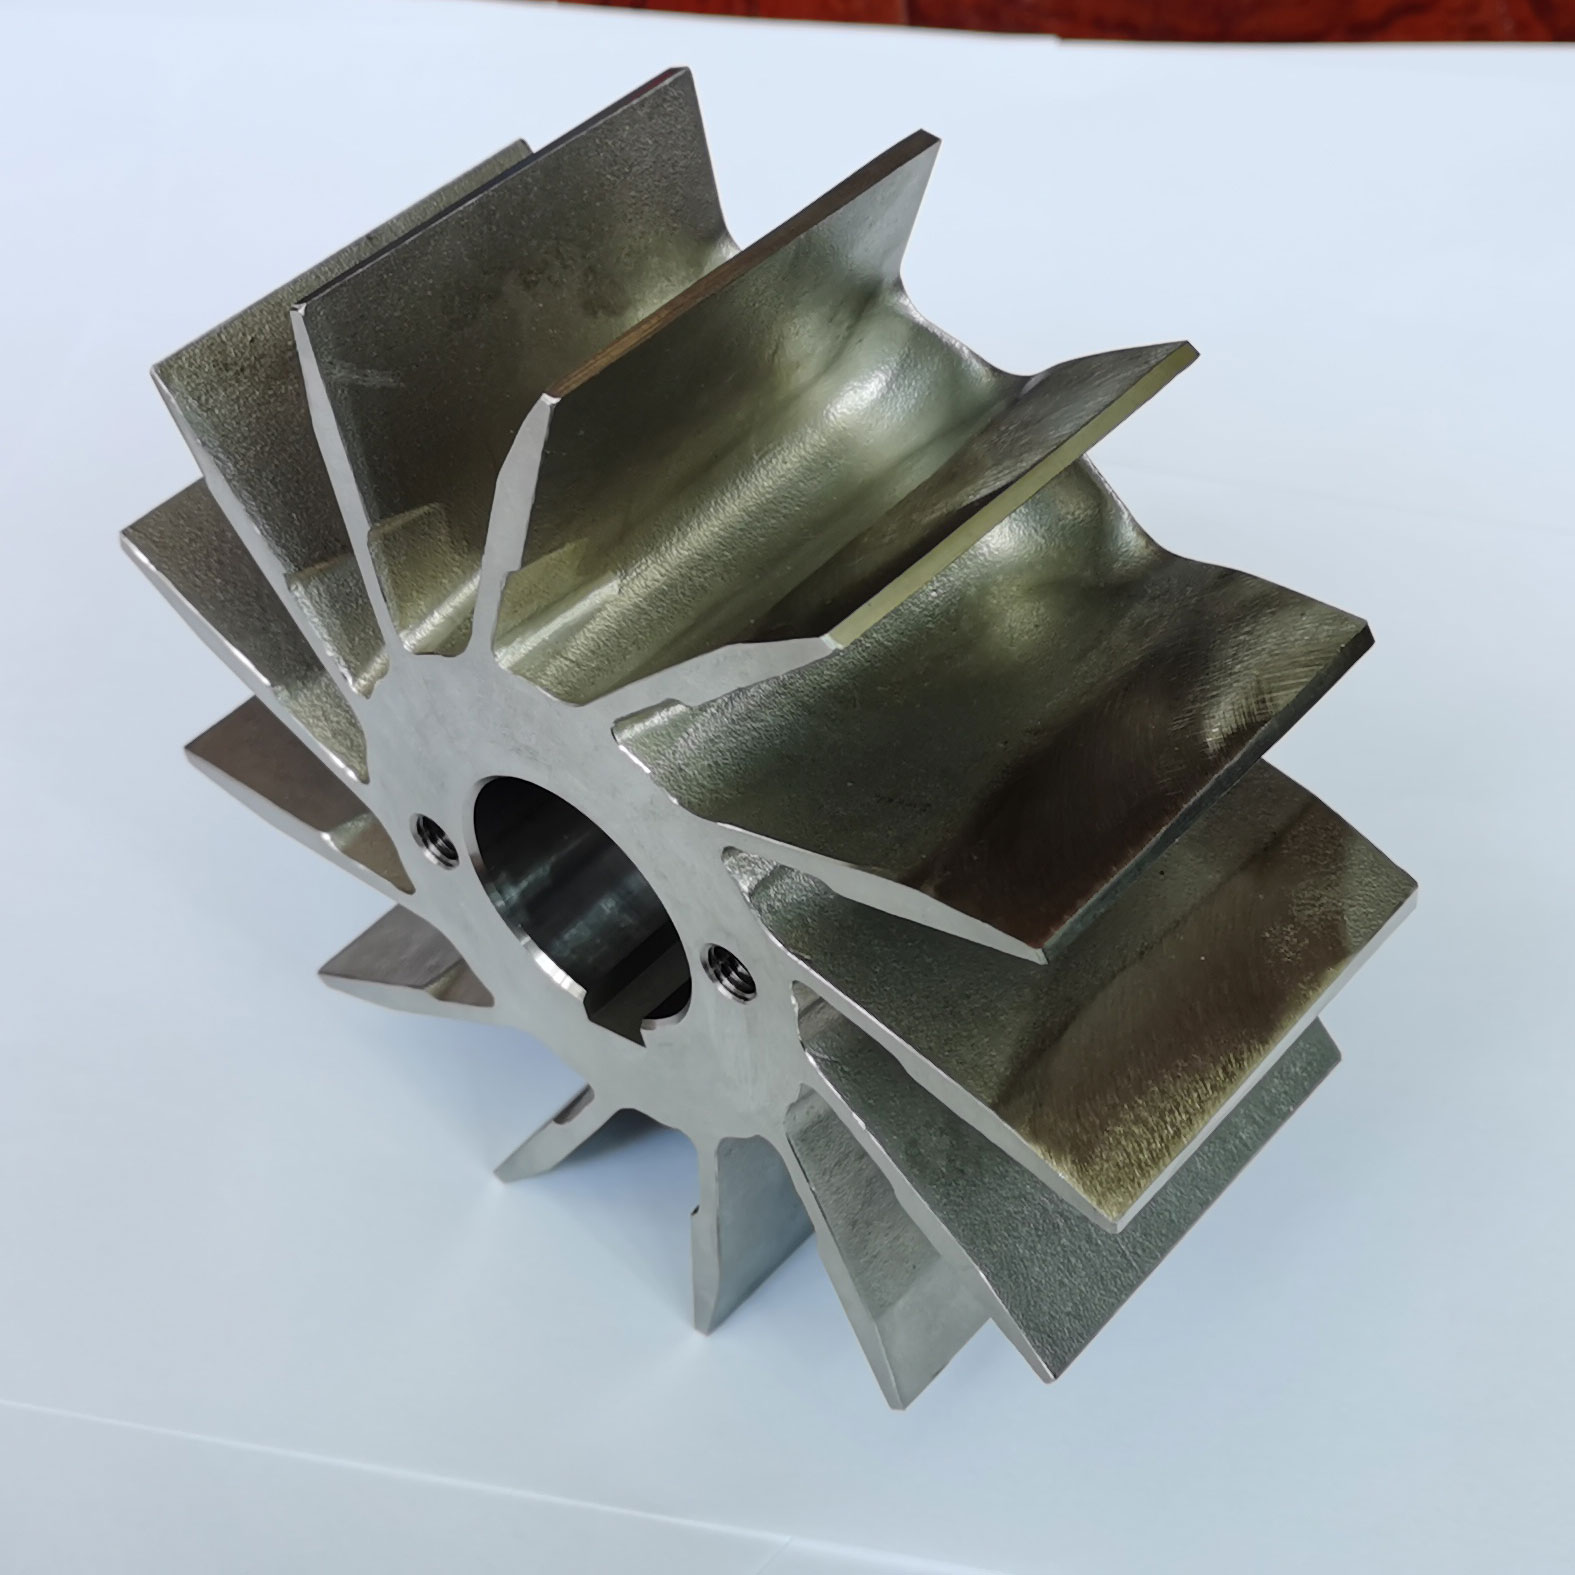 Duplex Stainless Steel Open Impeller by Investment Casting and CNC Machining Featured Image